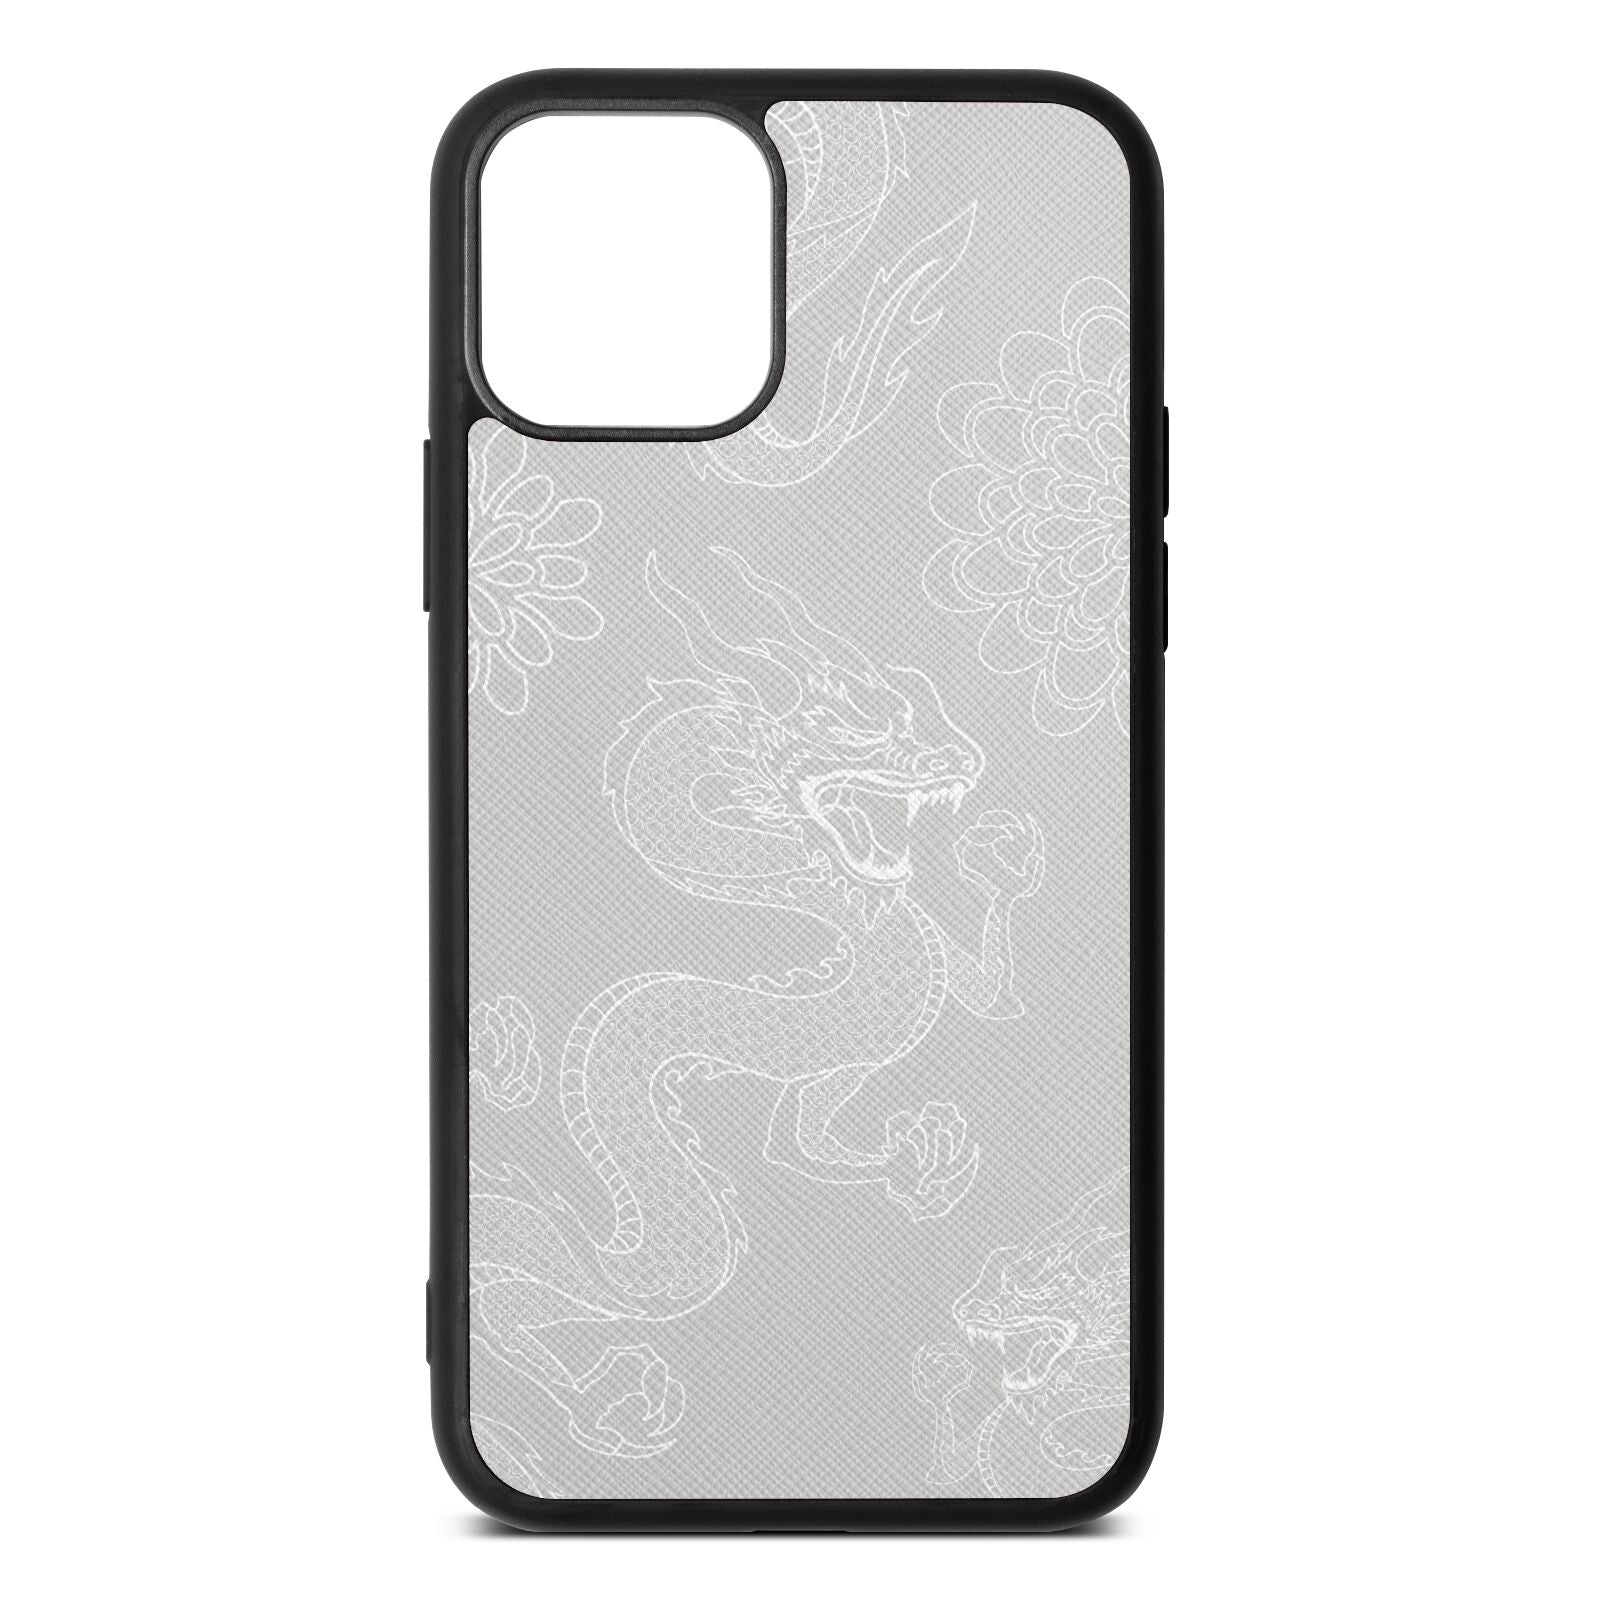 Dragons Silver Saffiano Leather iPhone 11 Case